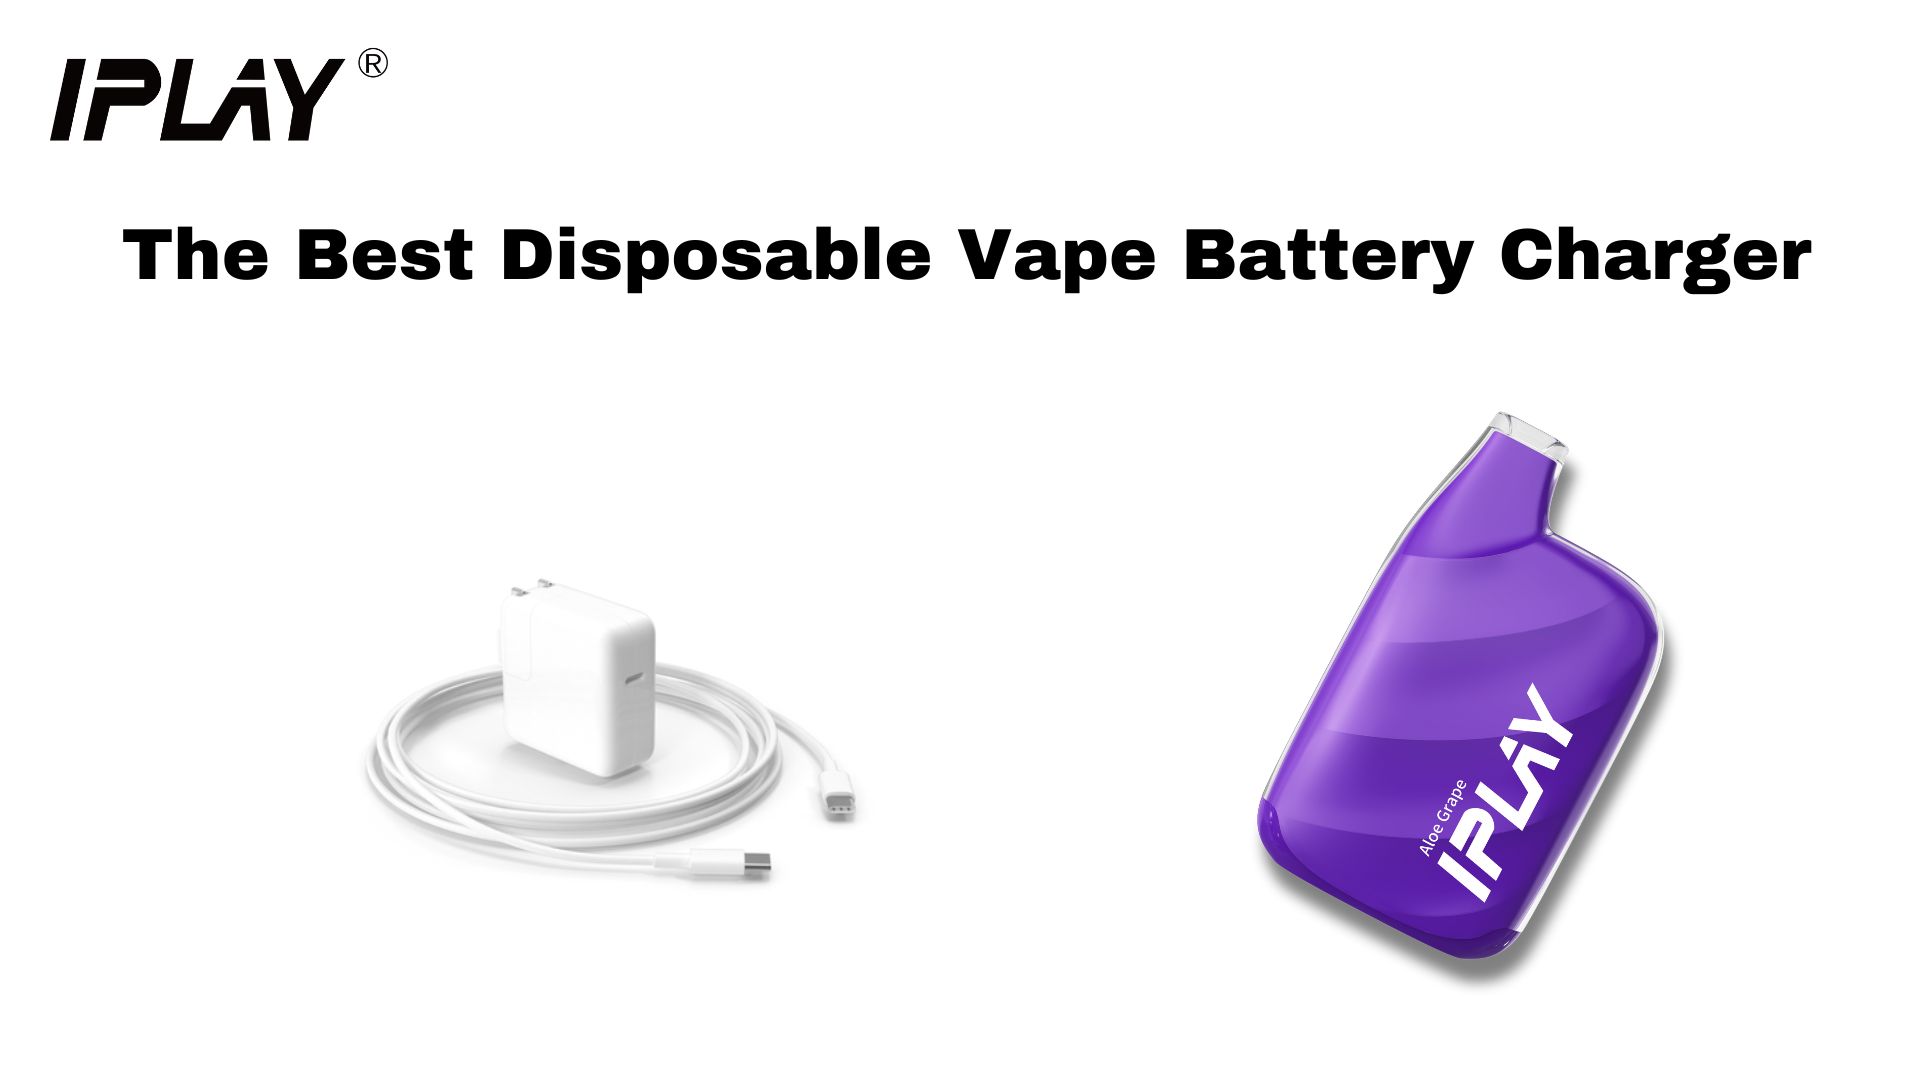 What Is the Best Disposable Vape Battery Charger